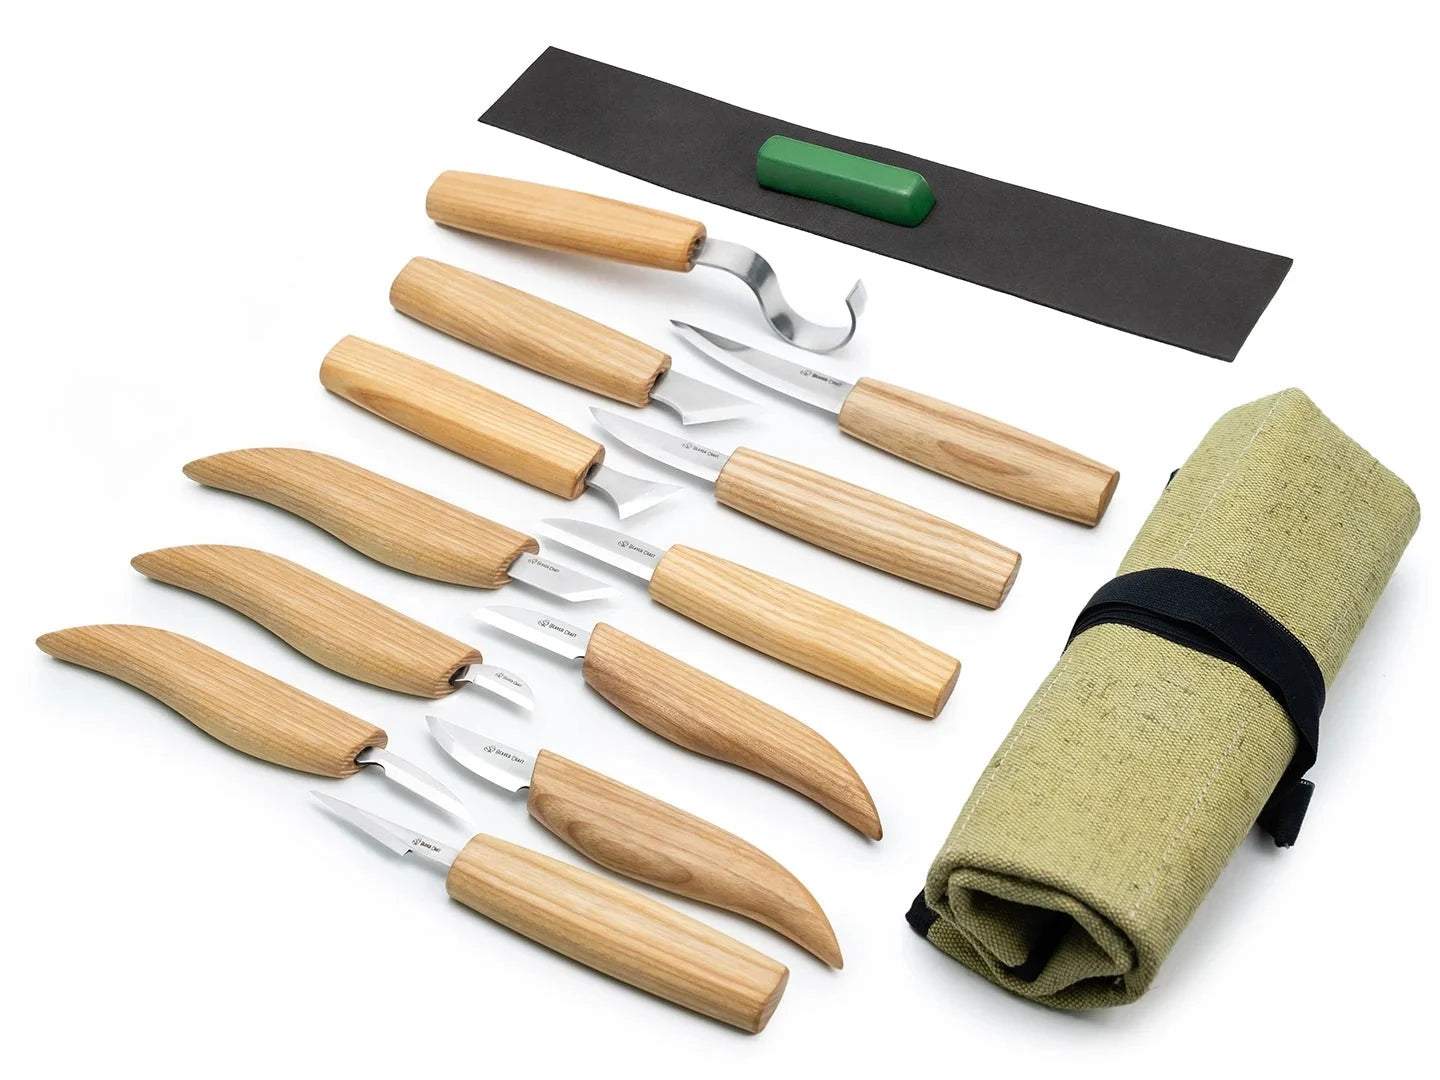 Wood Carving Tools 5 in 1 Knife Set - Includes Hook Knife